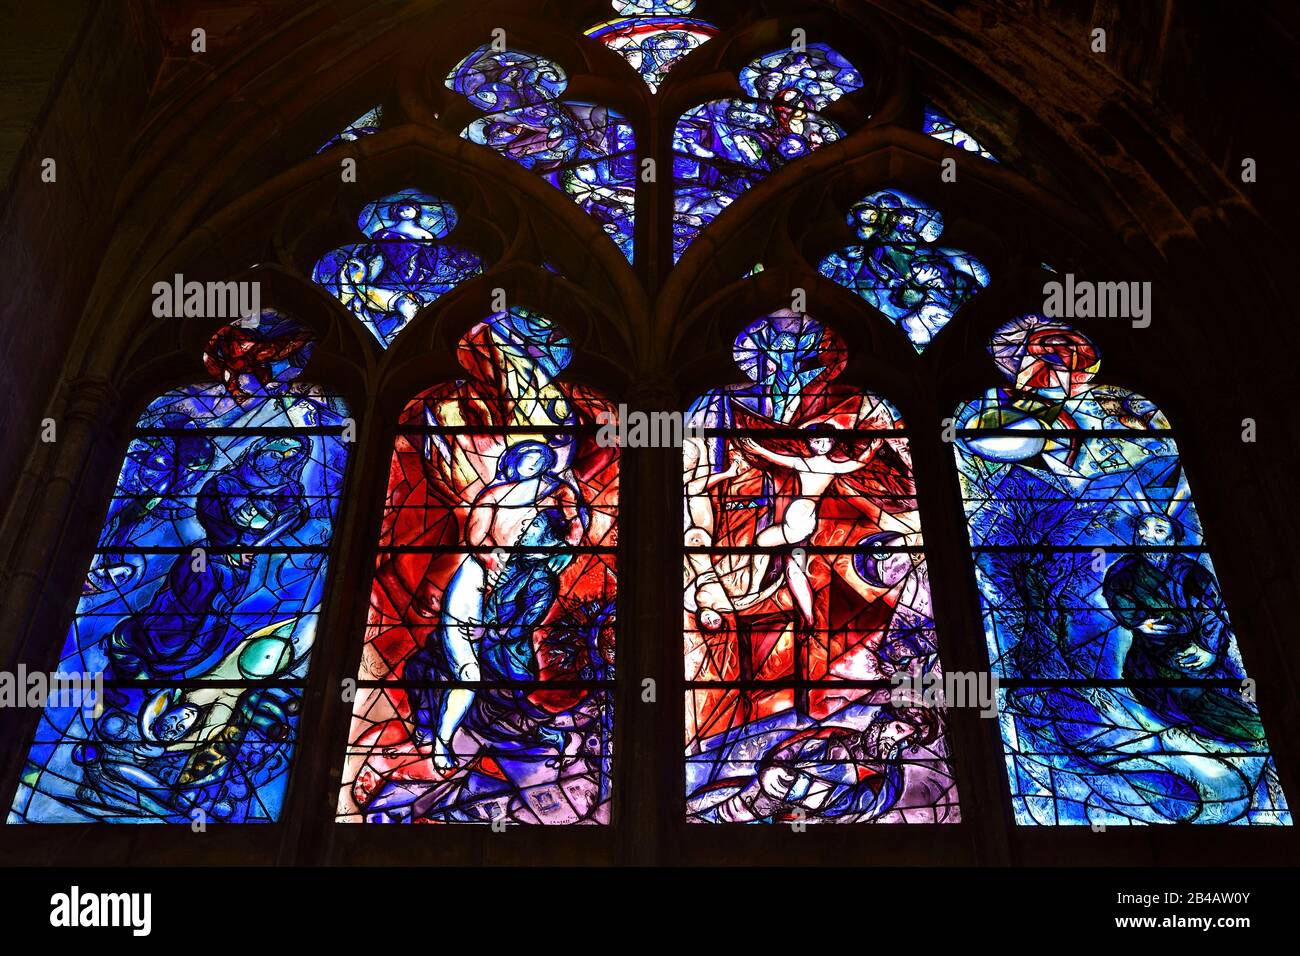 France, Moselle, Metz, Saint Etienne cathedral, Stained glass windows of the northern ambulatory having for subjects episodes from the Old Testament (Book of Genesis 22, 9-12 and 32, 25-28 and 28.10-13 and Book of Exodus 3, 1-2, 4-6) by Marc Chagall (20th century) made by Simon Marq workshop in Reims (all rights reserved) Stock Photo